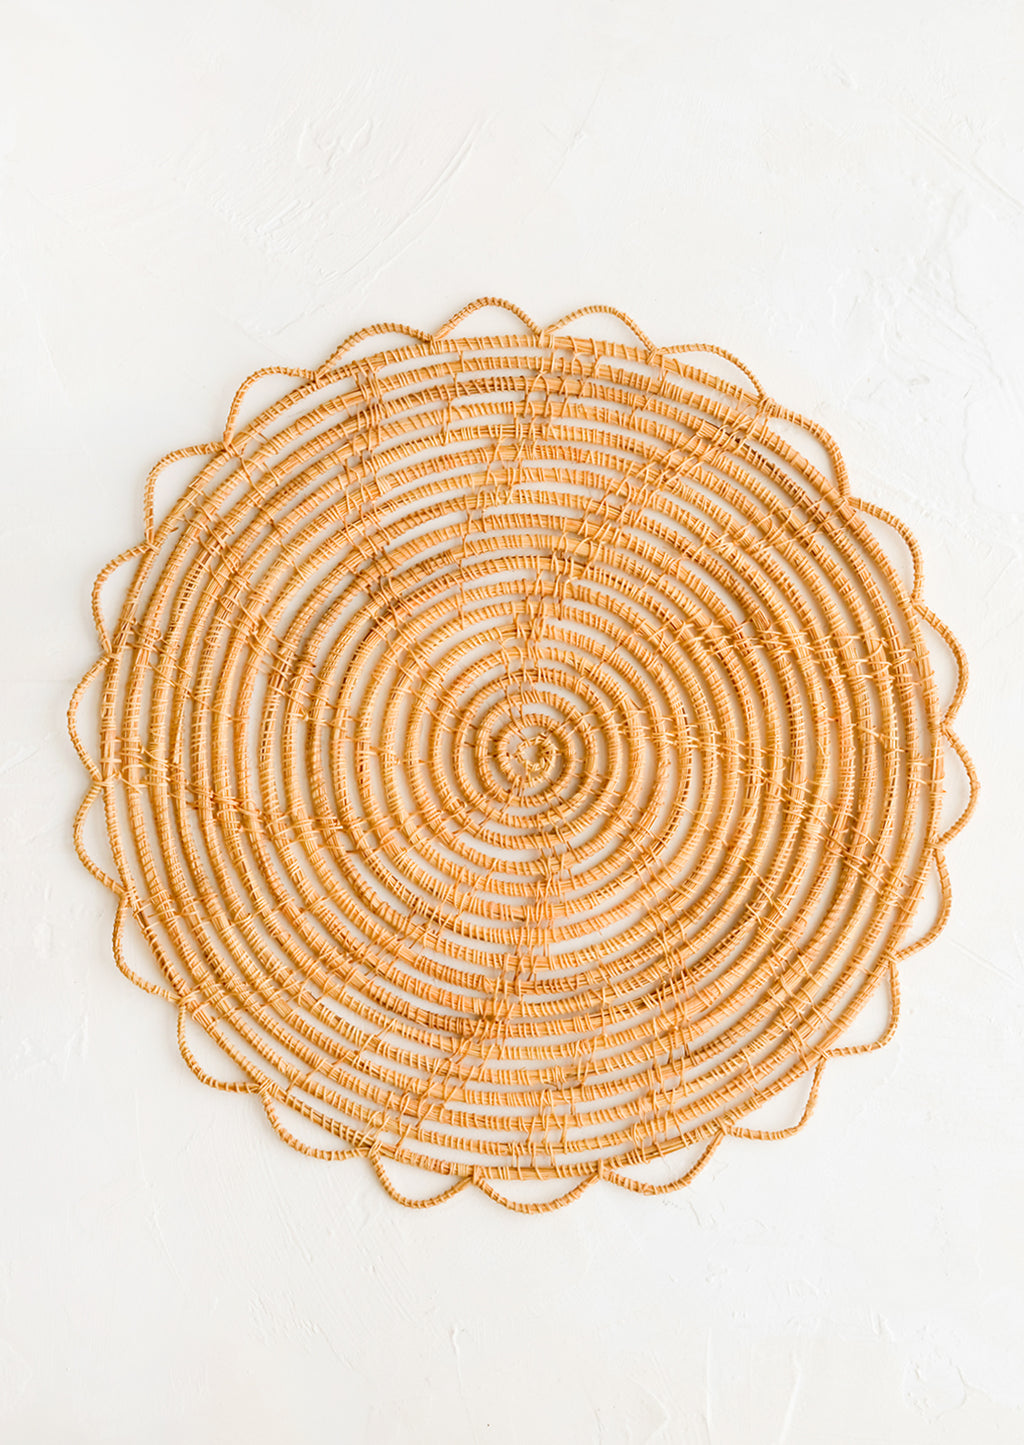 1: A round placemat with open weave scalloped edge.